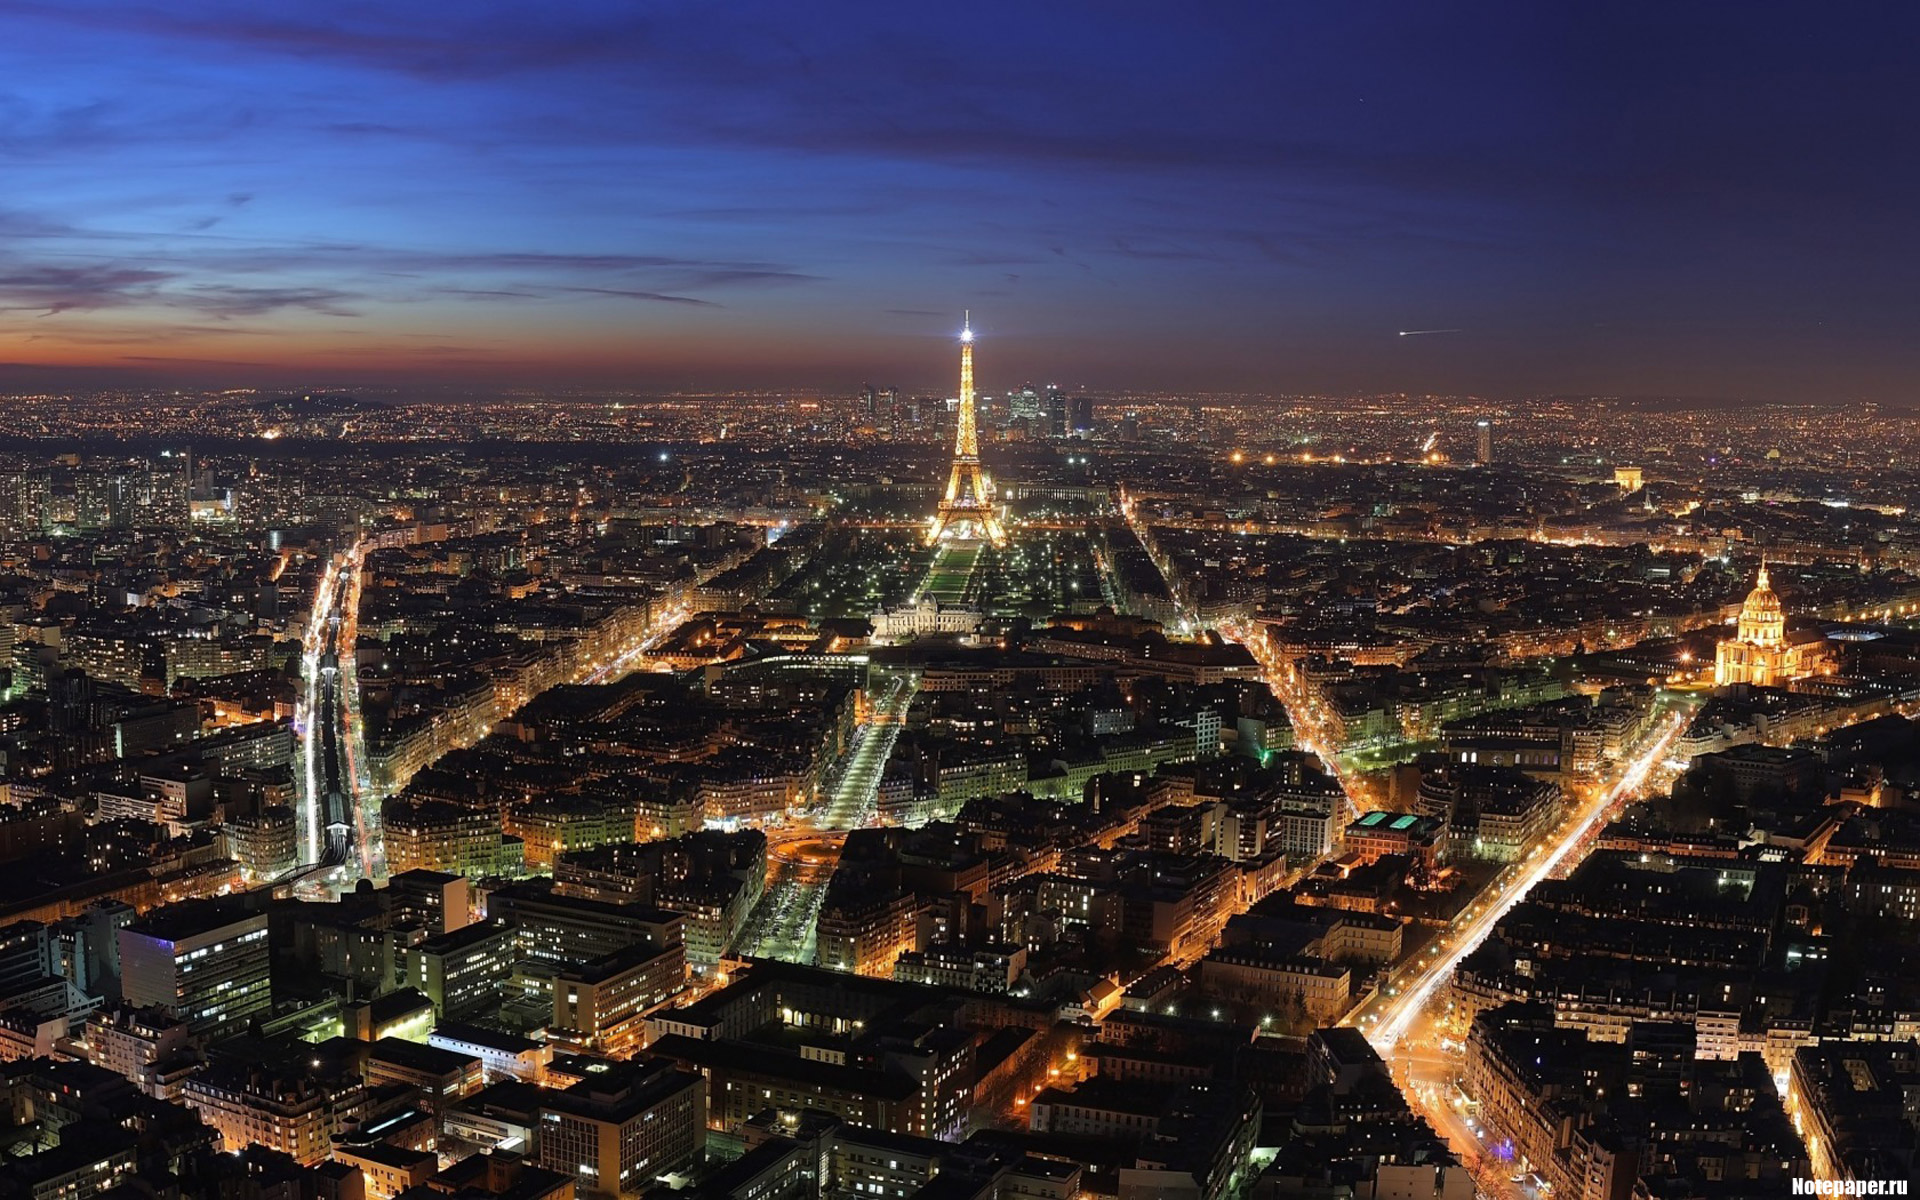 General 1920x1200 Paris Eiffel Tower night sky cityscape France city lights aerial view